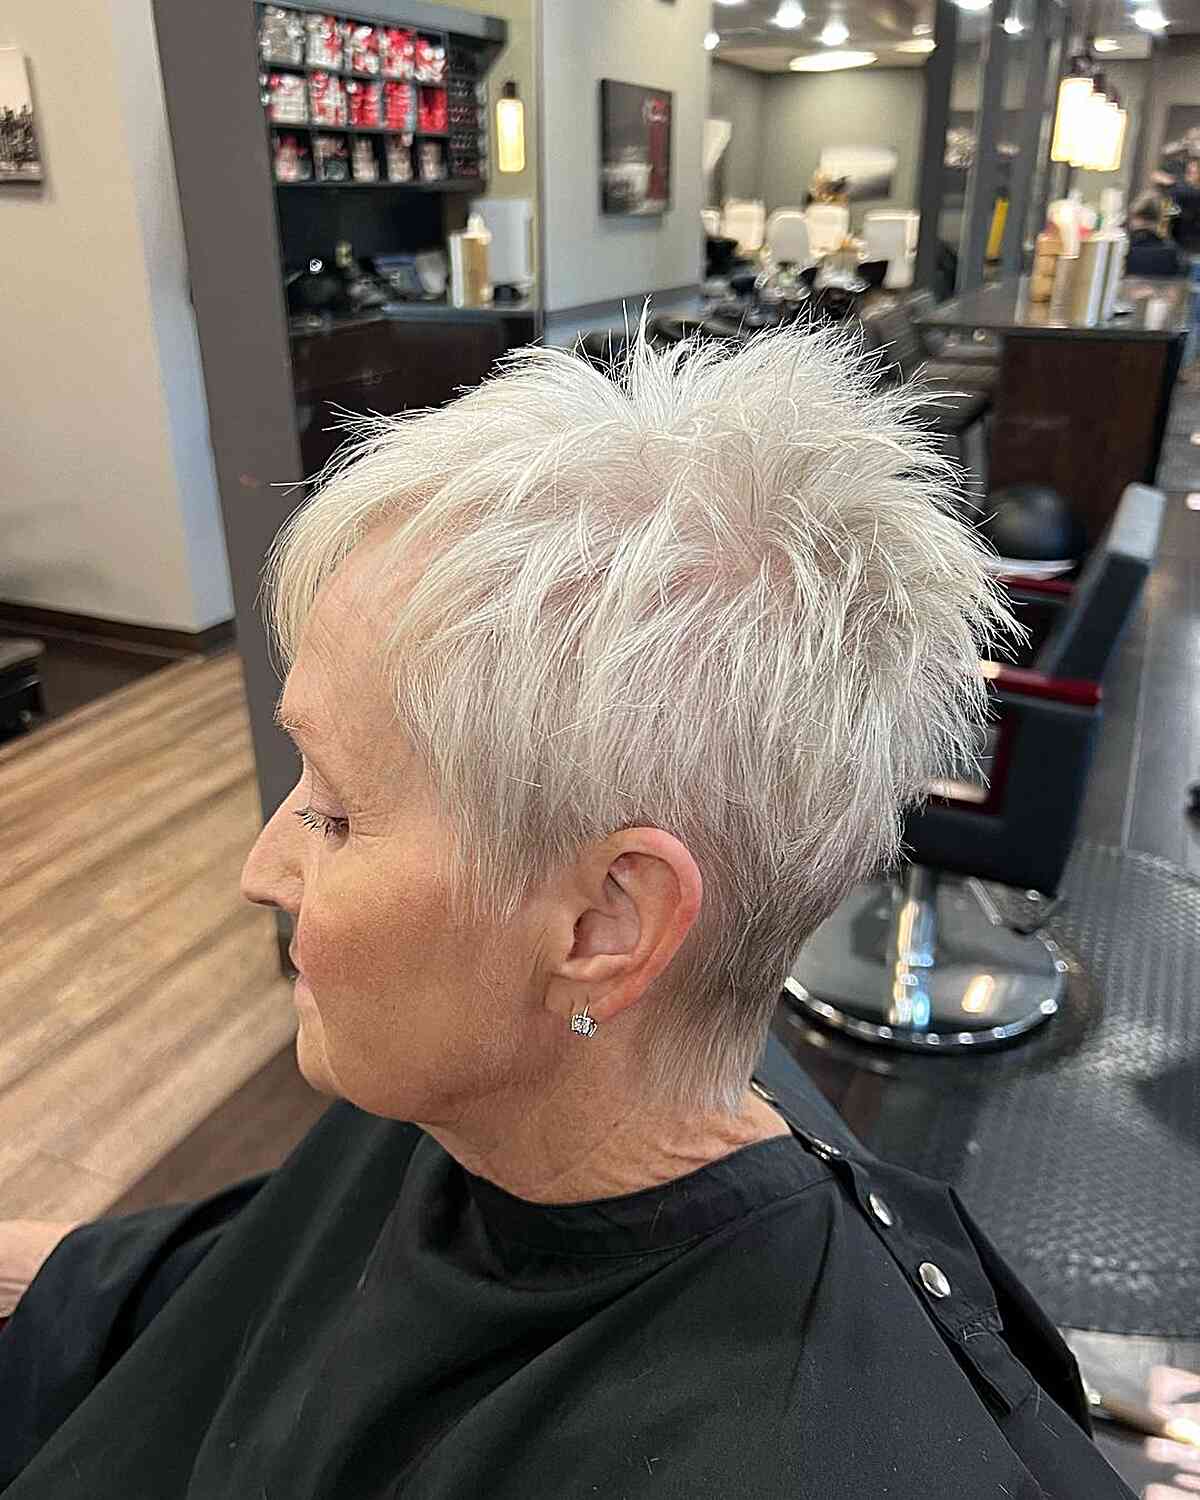 54 Best Short Hairstyles for Women Over 50 with Fine Hair